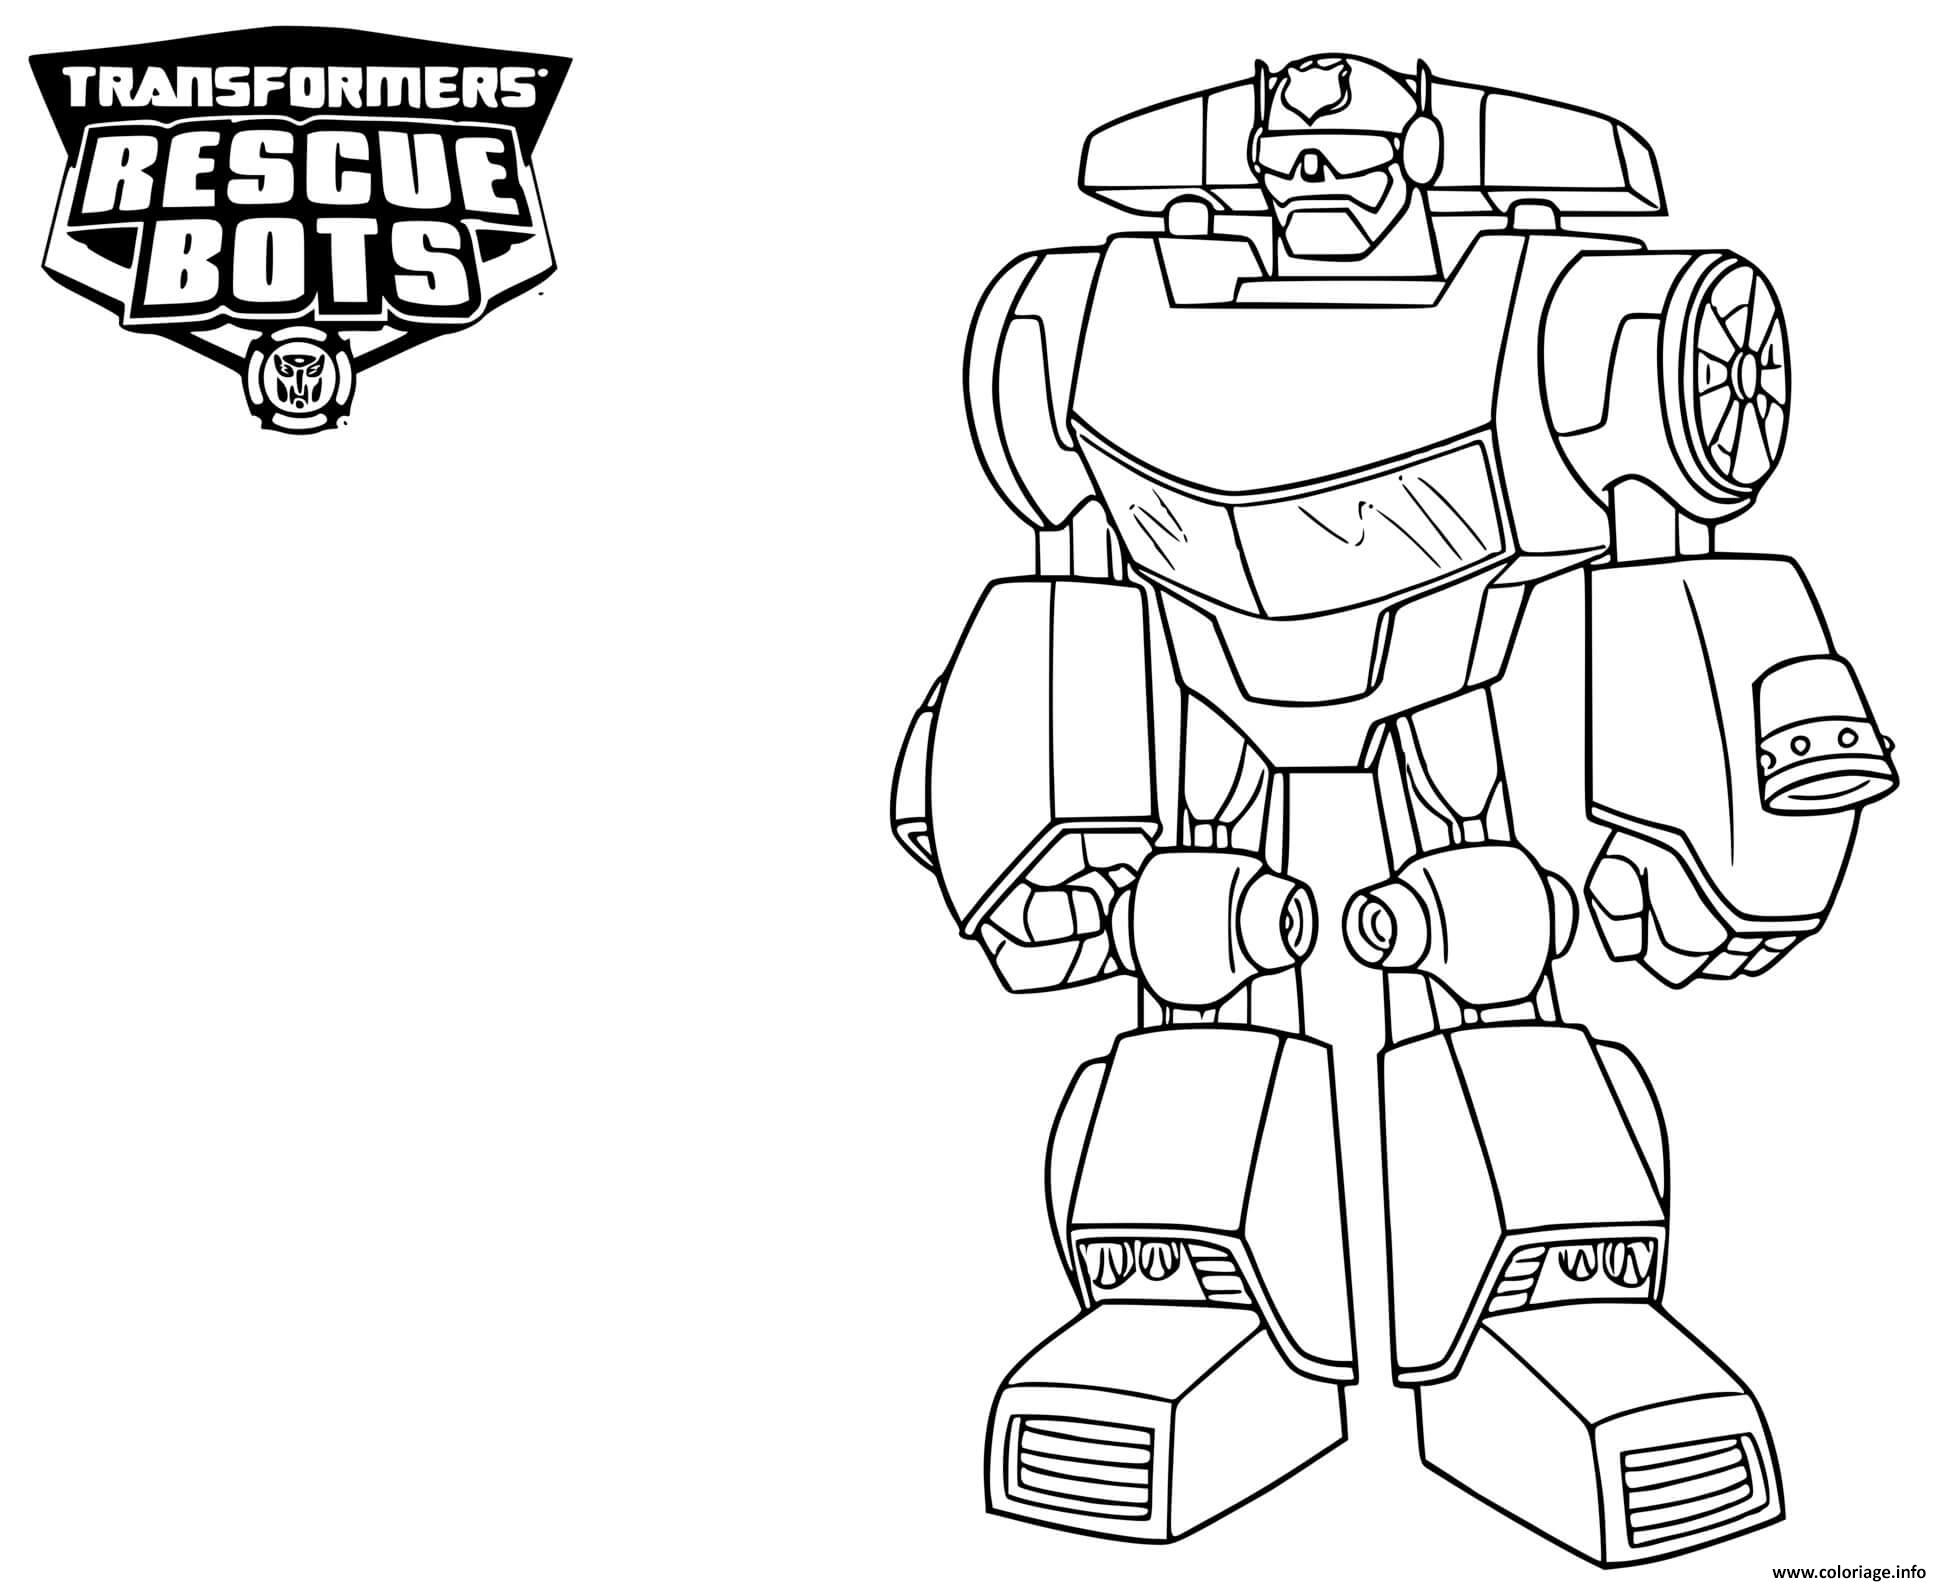 Coloriage Transformers Rescue Bots Chase Dessin Transformers À Imprimer pour Transformers Coloriage